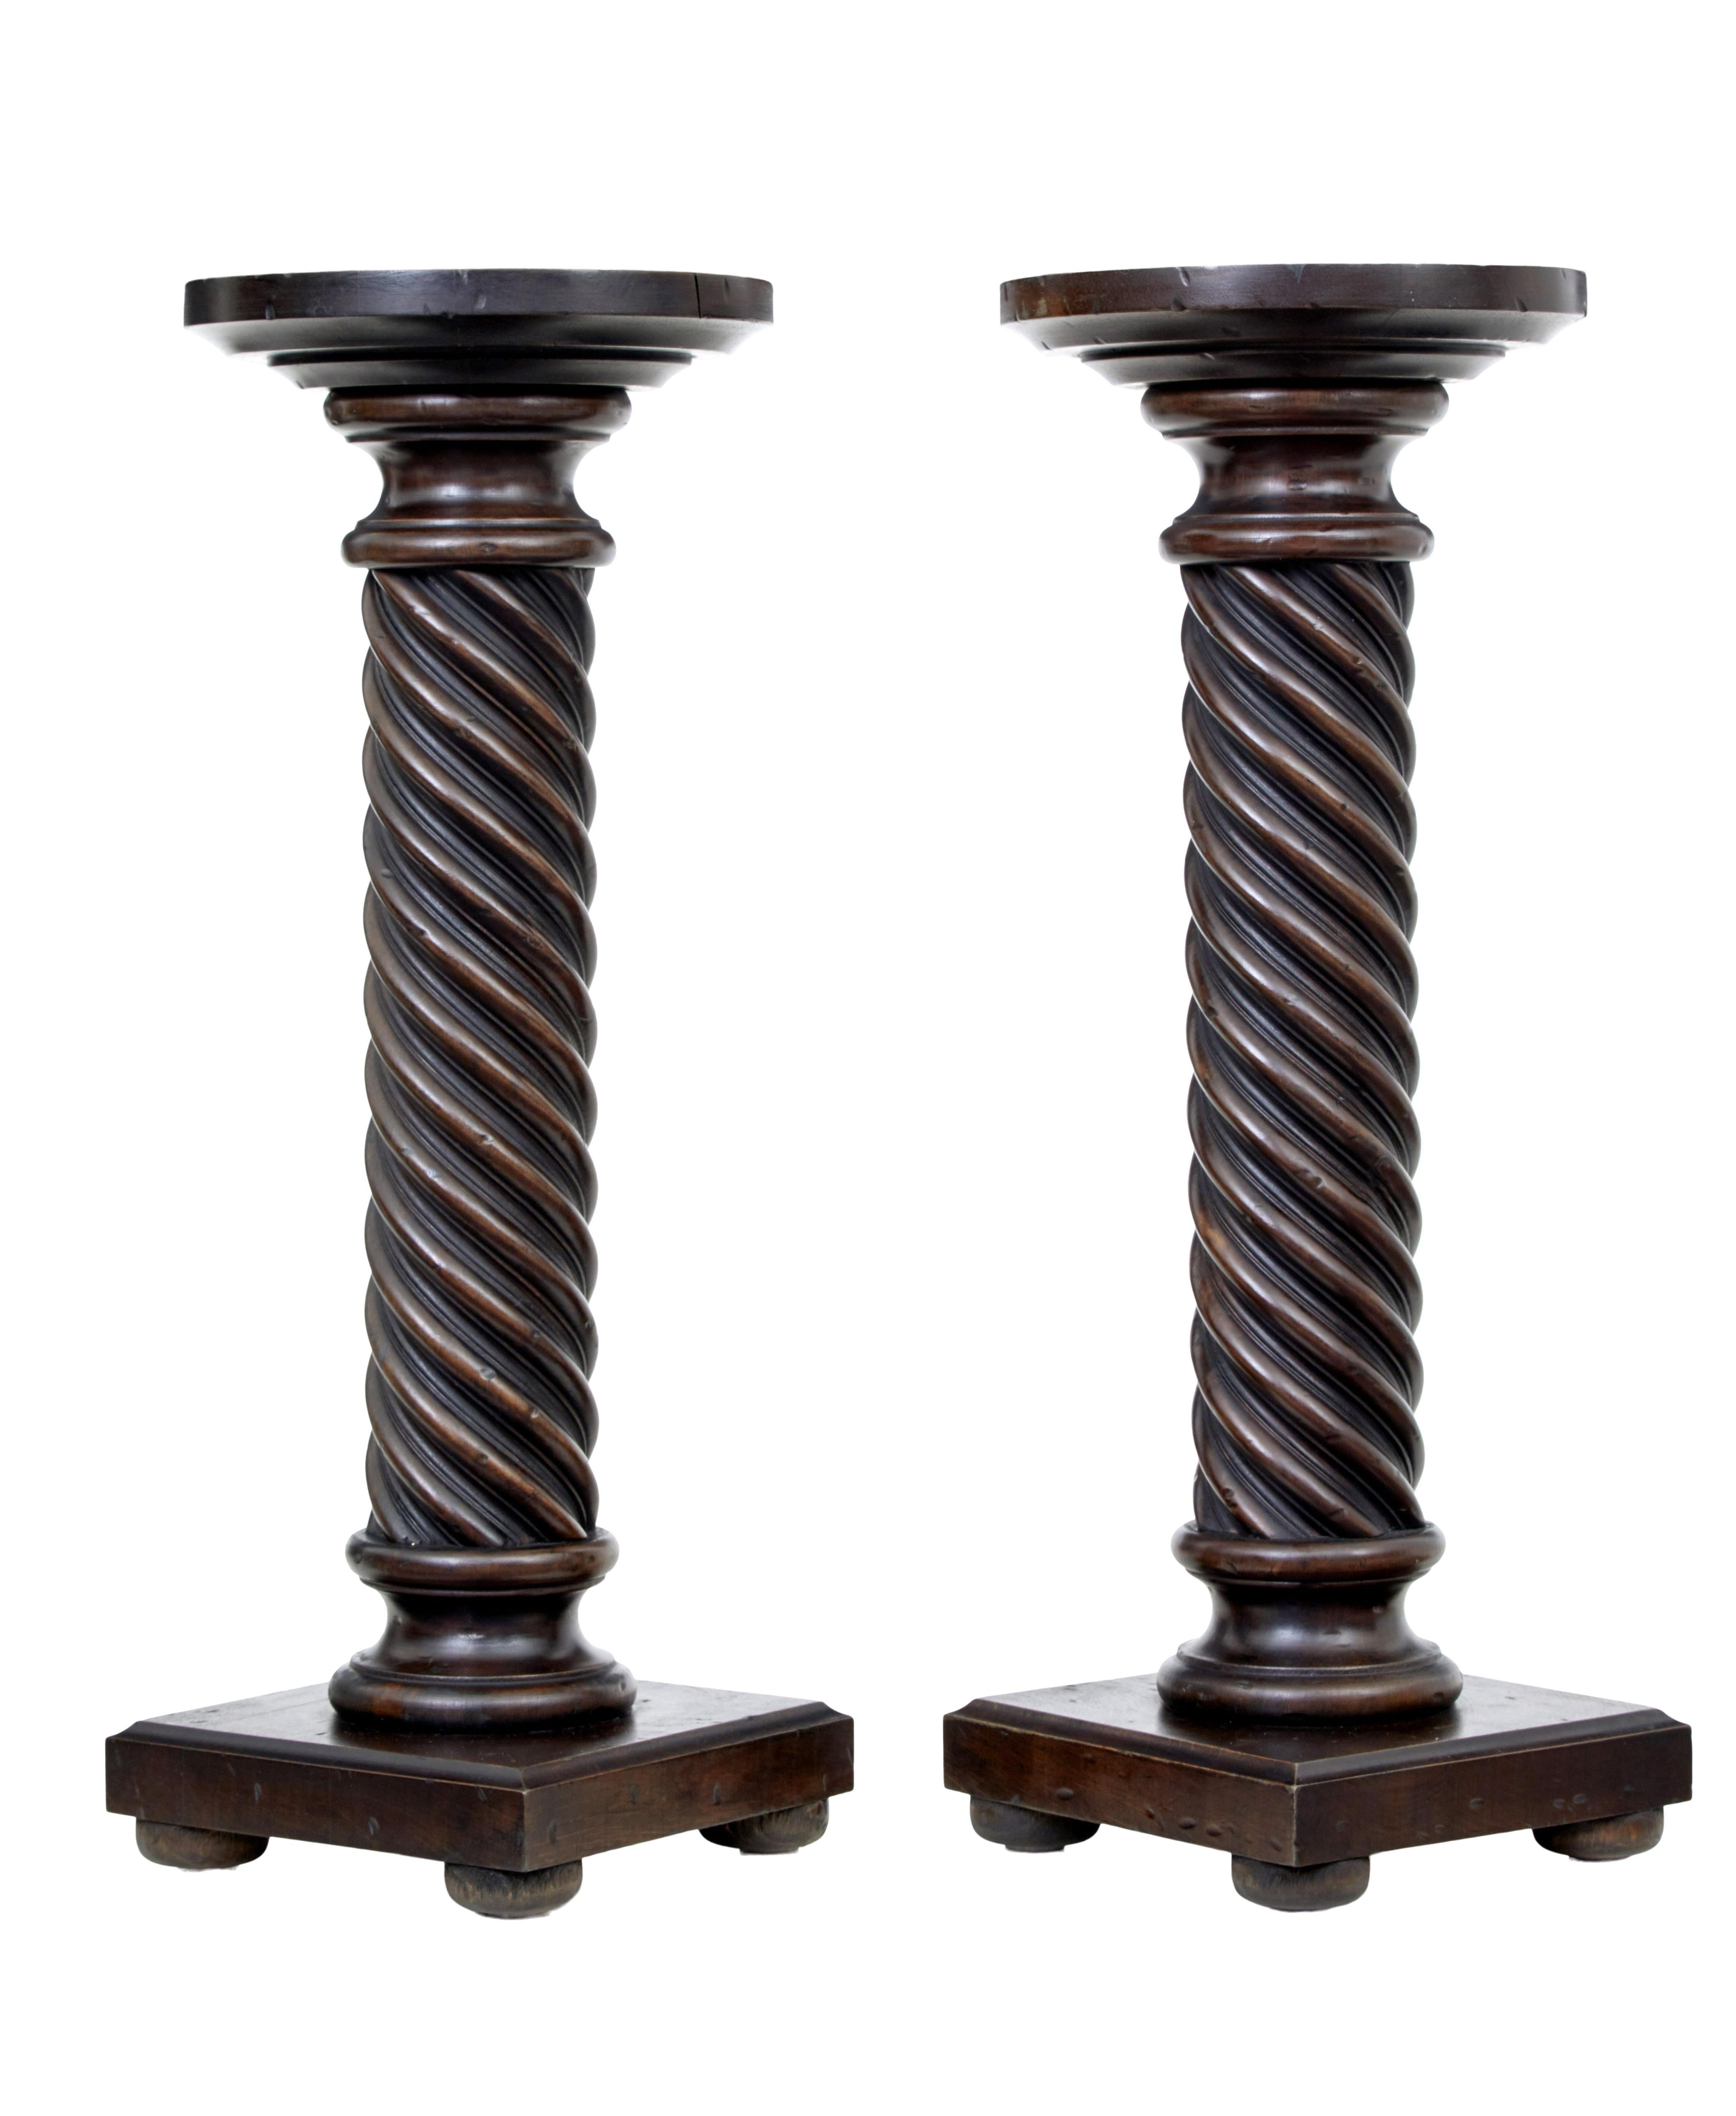 Small pair of late 19th century mahogany barley twist columns, circa 1890.

Good quality pair of pedestals, circular 10 inch diameter with twisting column linking down to a square base.

Surface marks to top surface and base.

Top diameter: